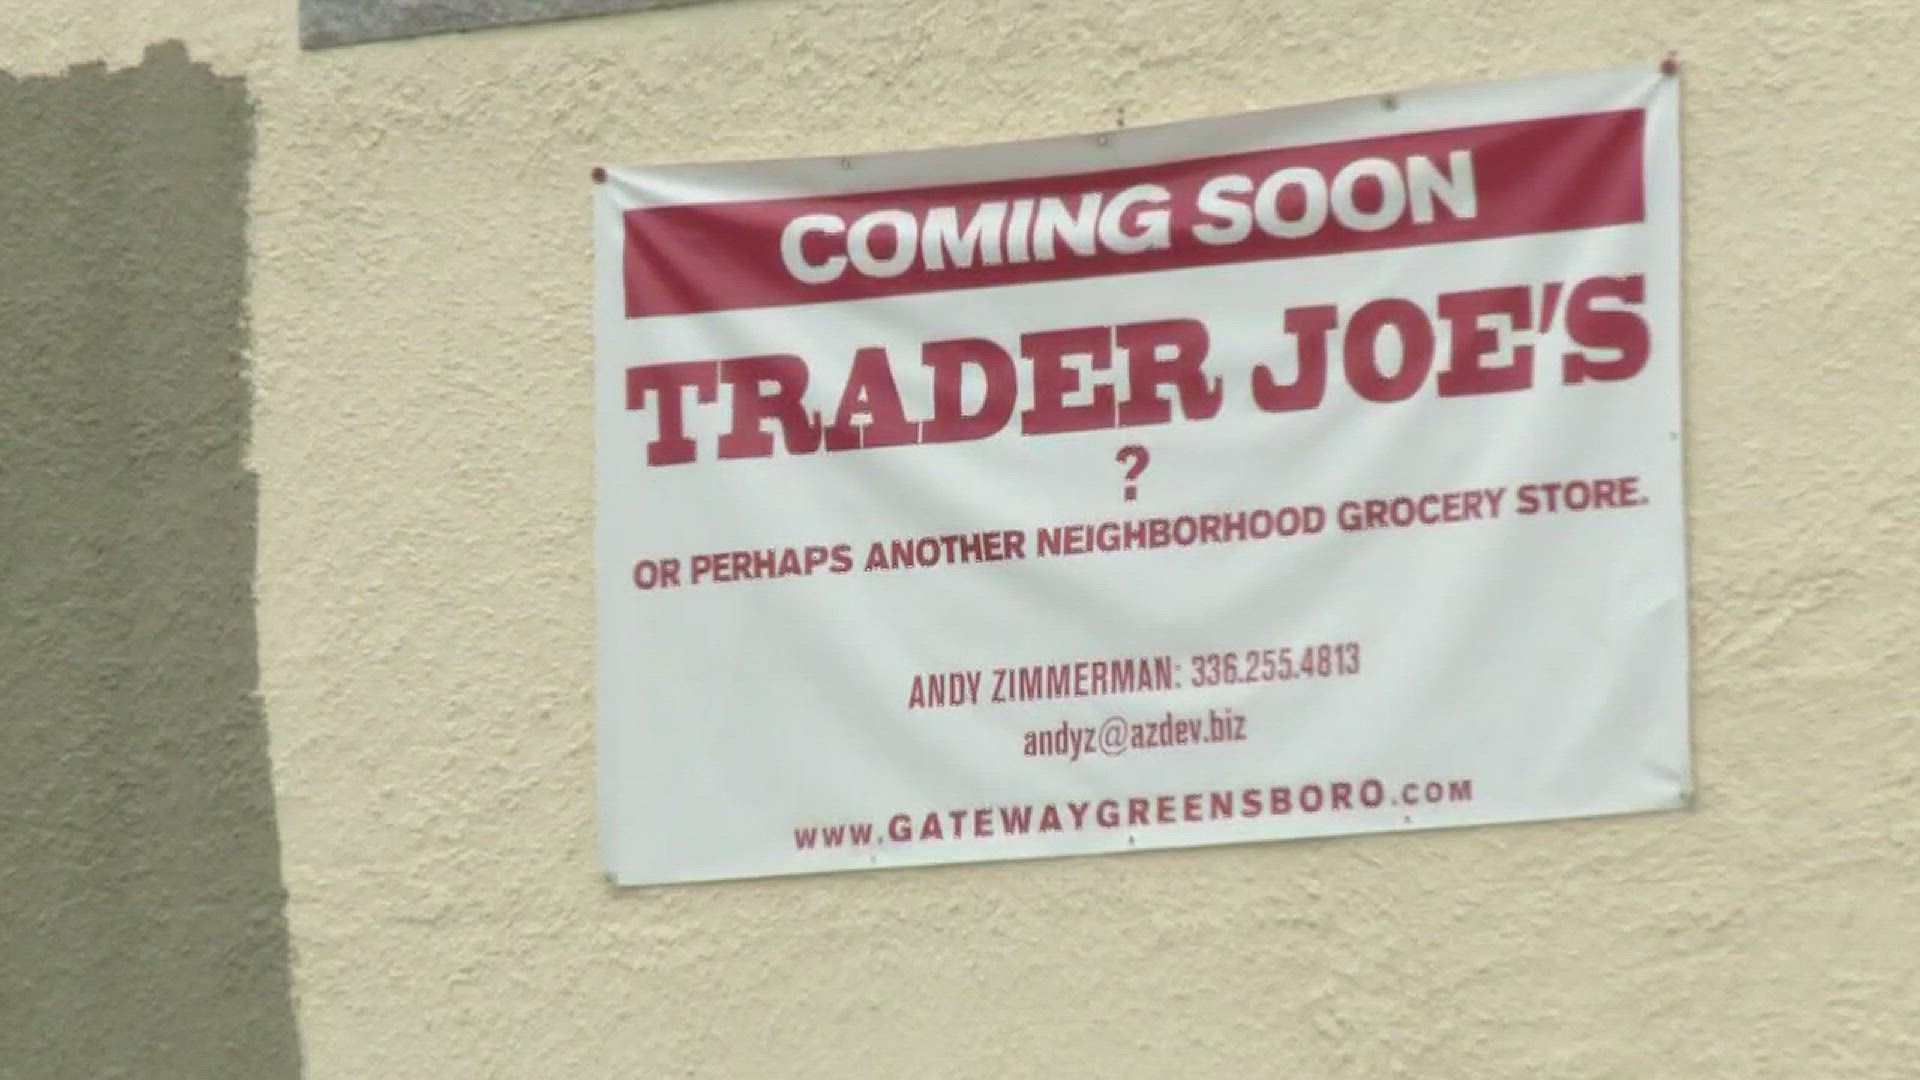 Soon Trader Joe's ?" Sign Posted In Greensboro